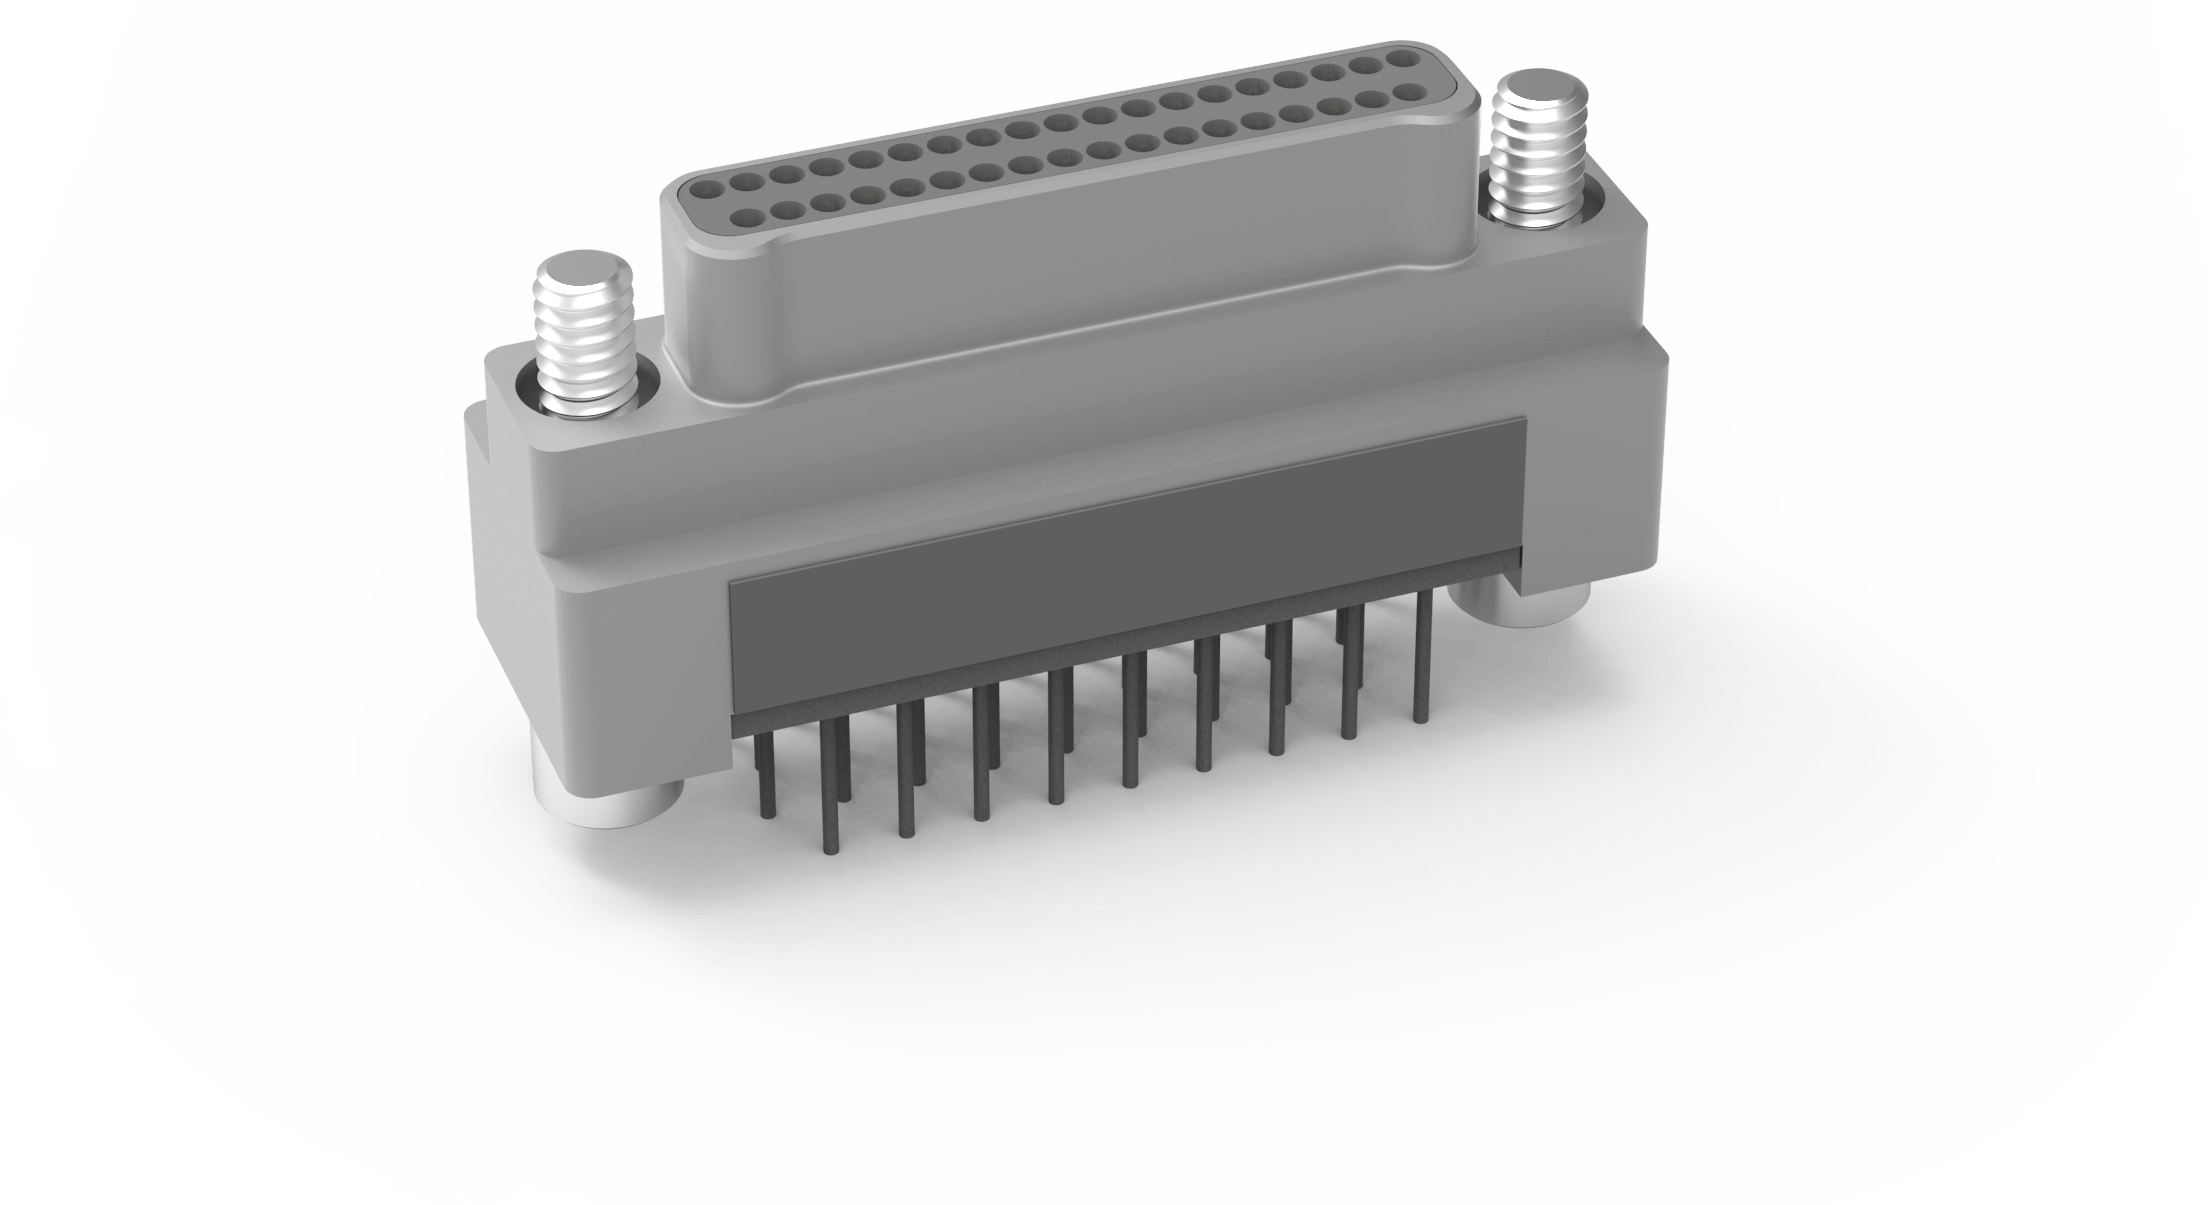 Nano-D, Metal, Board Mount, SMT, Vertical Receptacle with Mounting